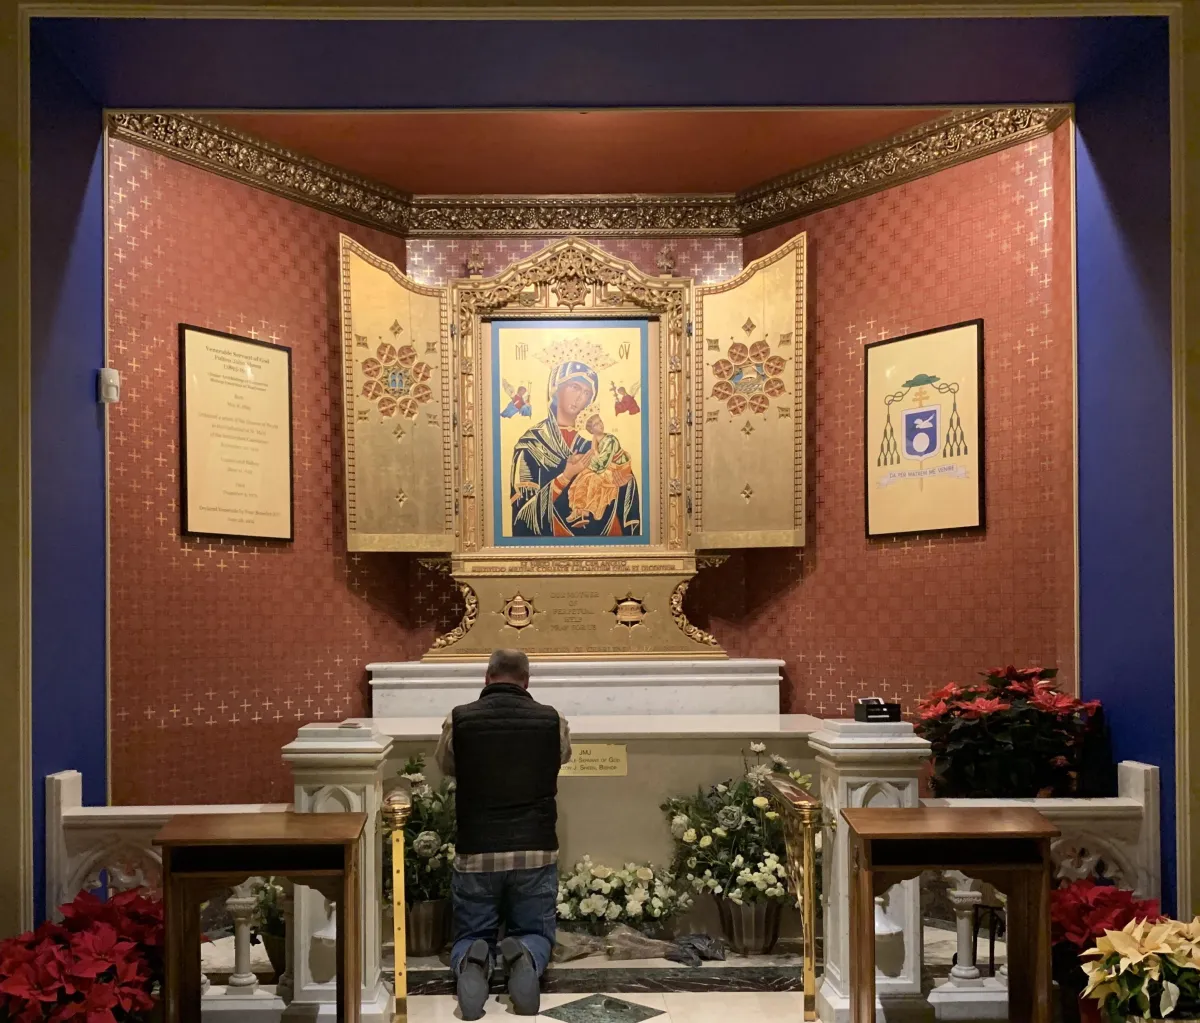 Dr. Howard praying in front of the tomb of Fulton Sheen